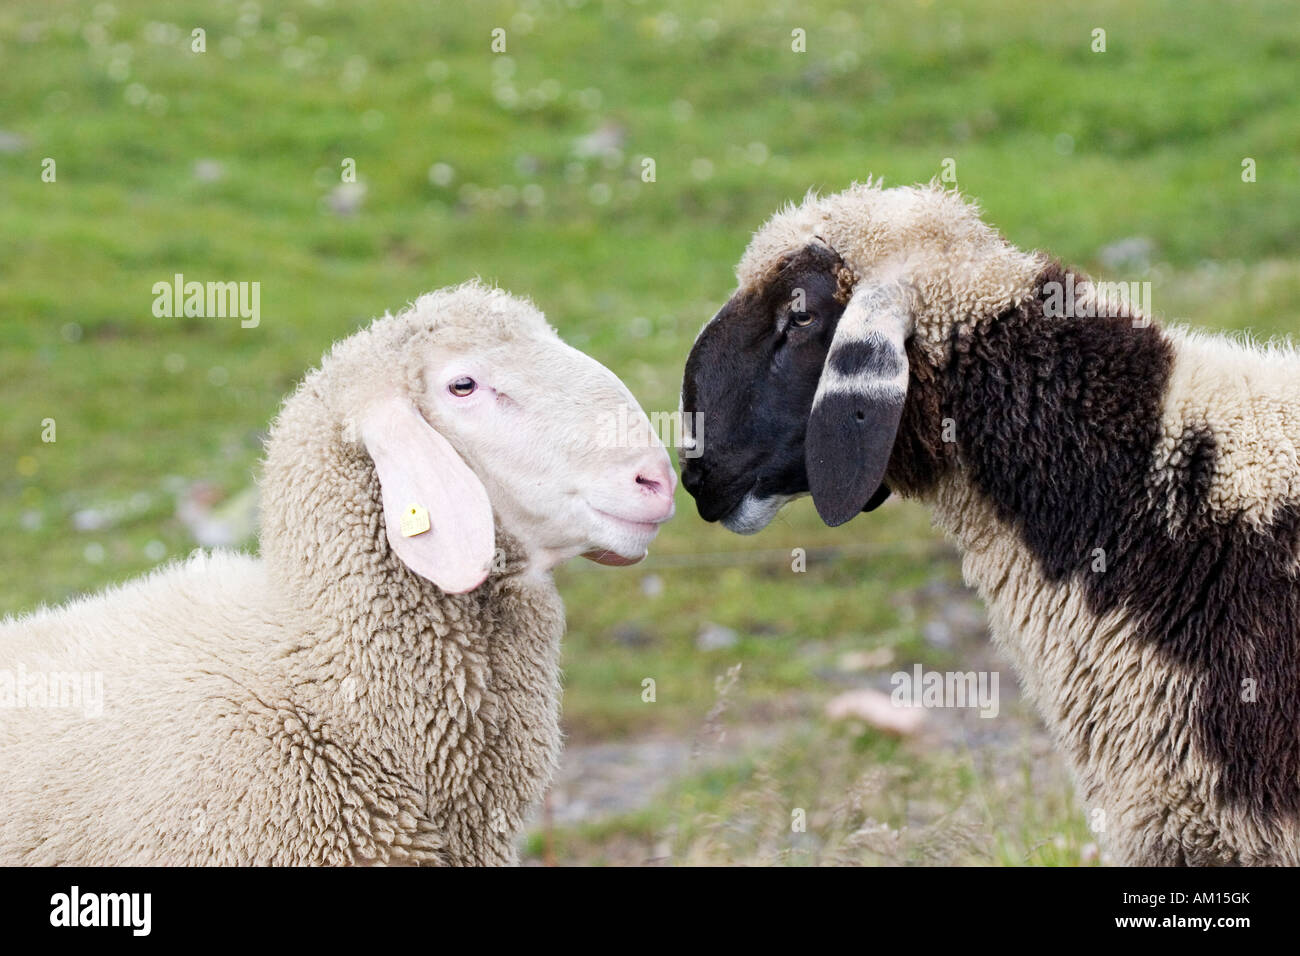 Two sheep on a meadow, National Park Hohe Tauern, Austria Stock Photo